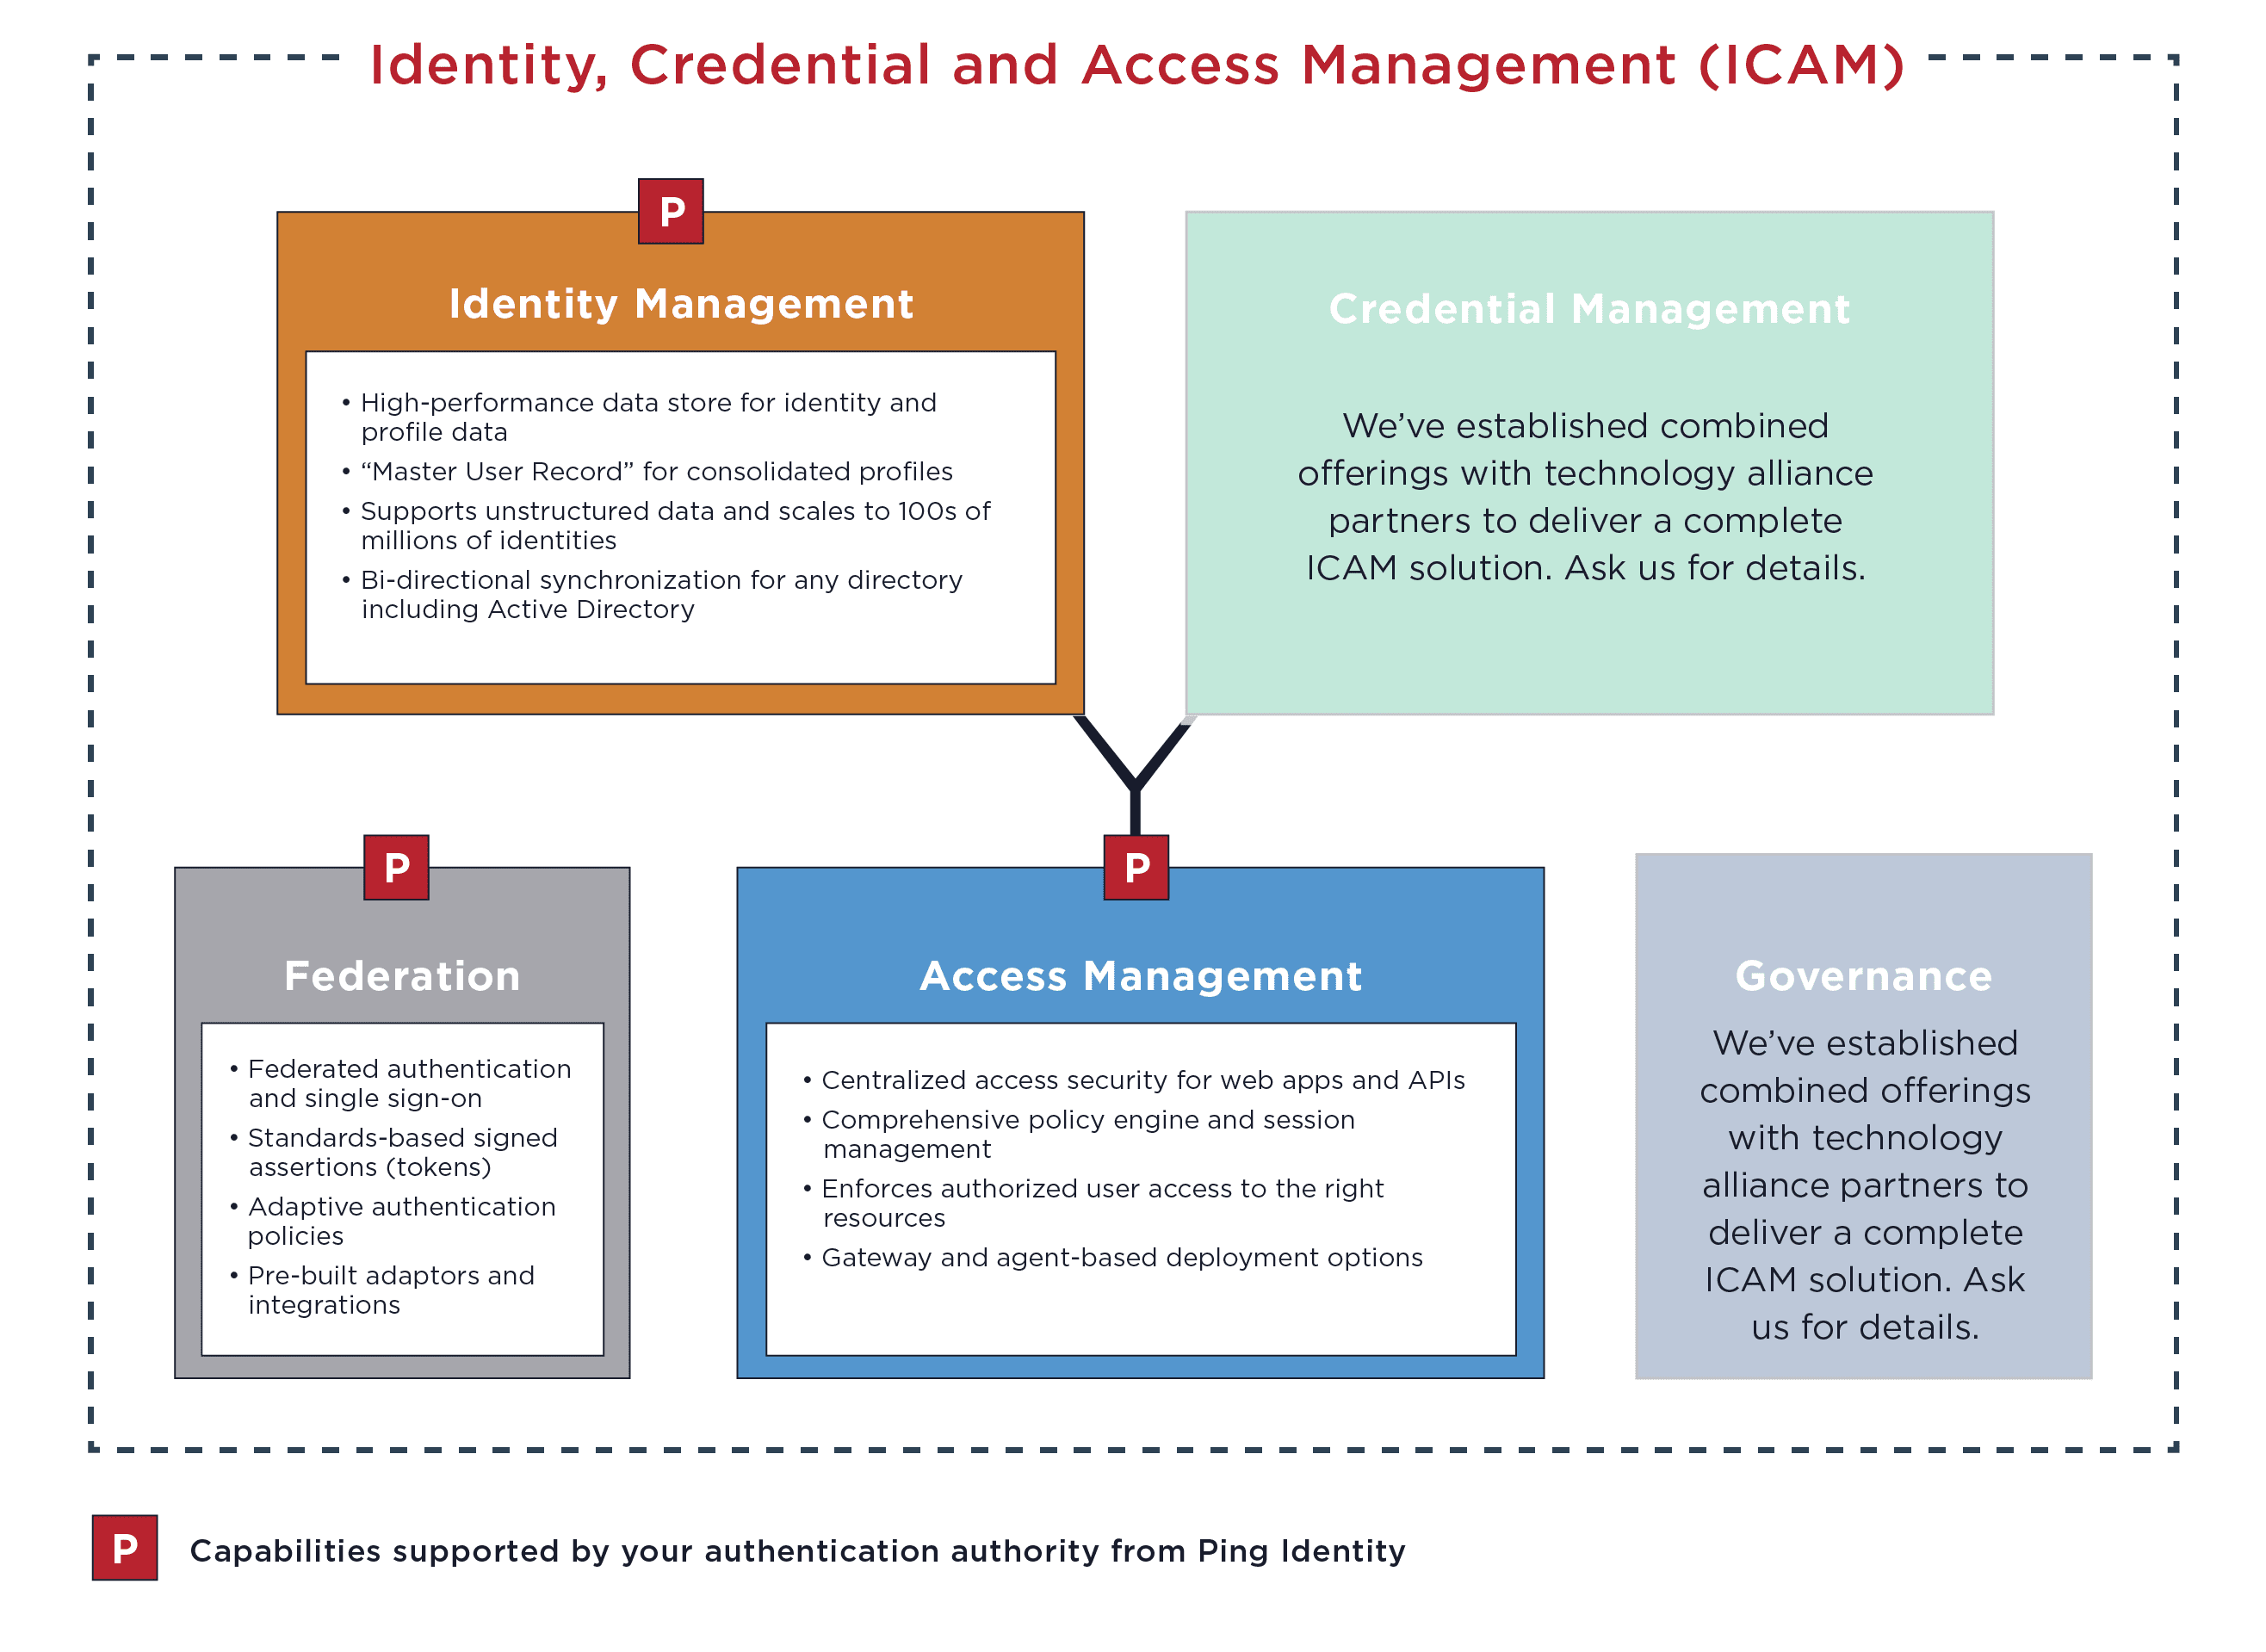 Identity, Credential and Access Management (ICAM) diagram